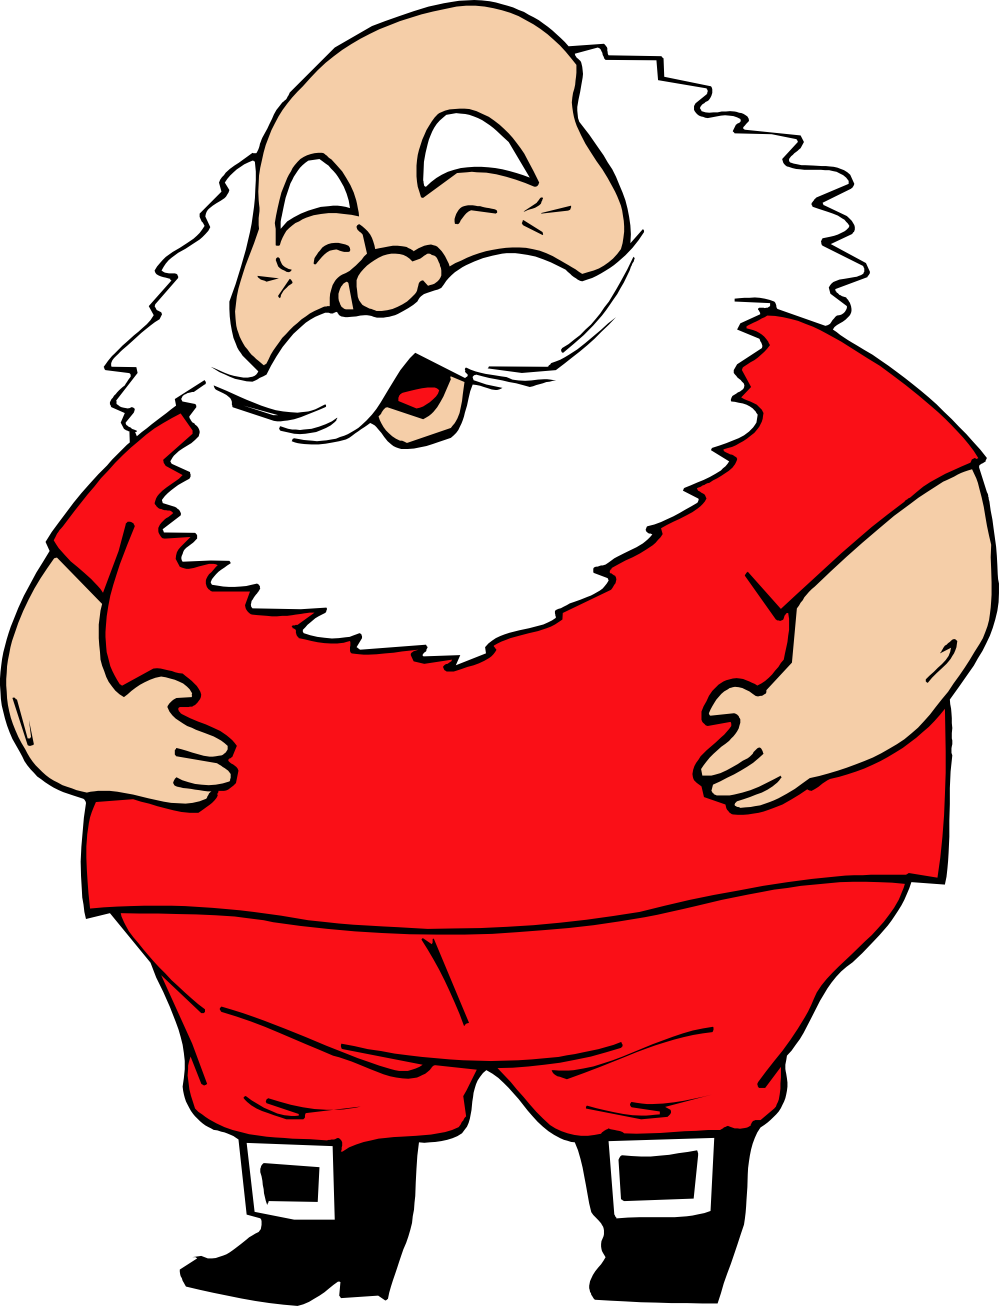 silly santa funny clipart - Clipground